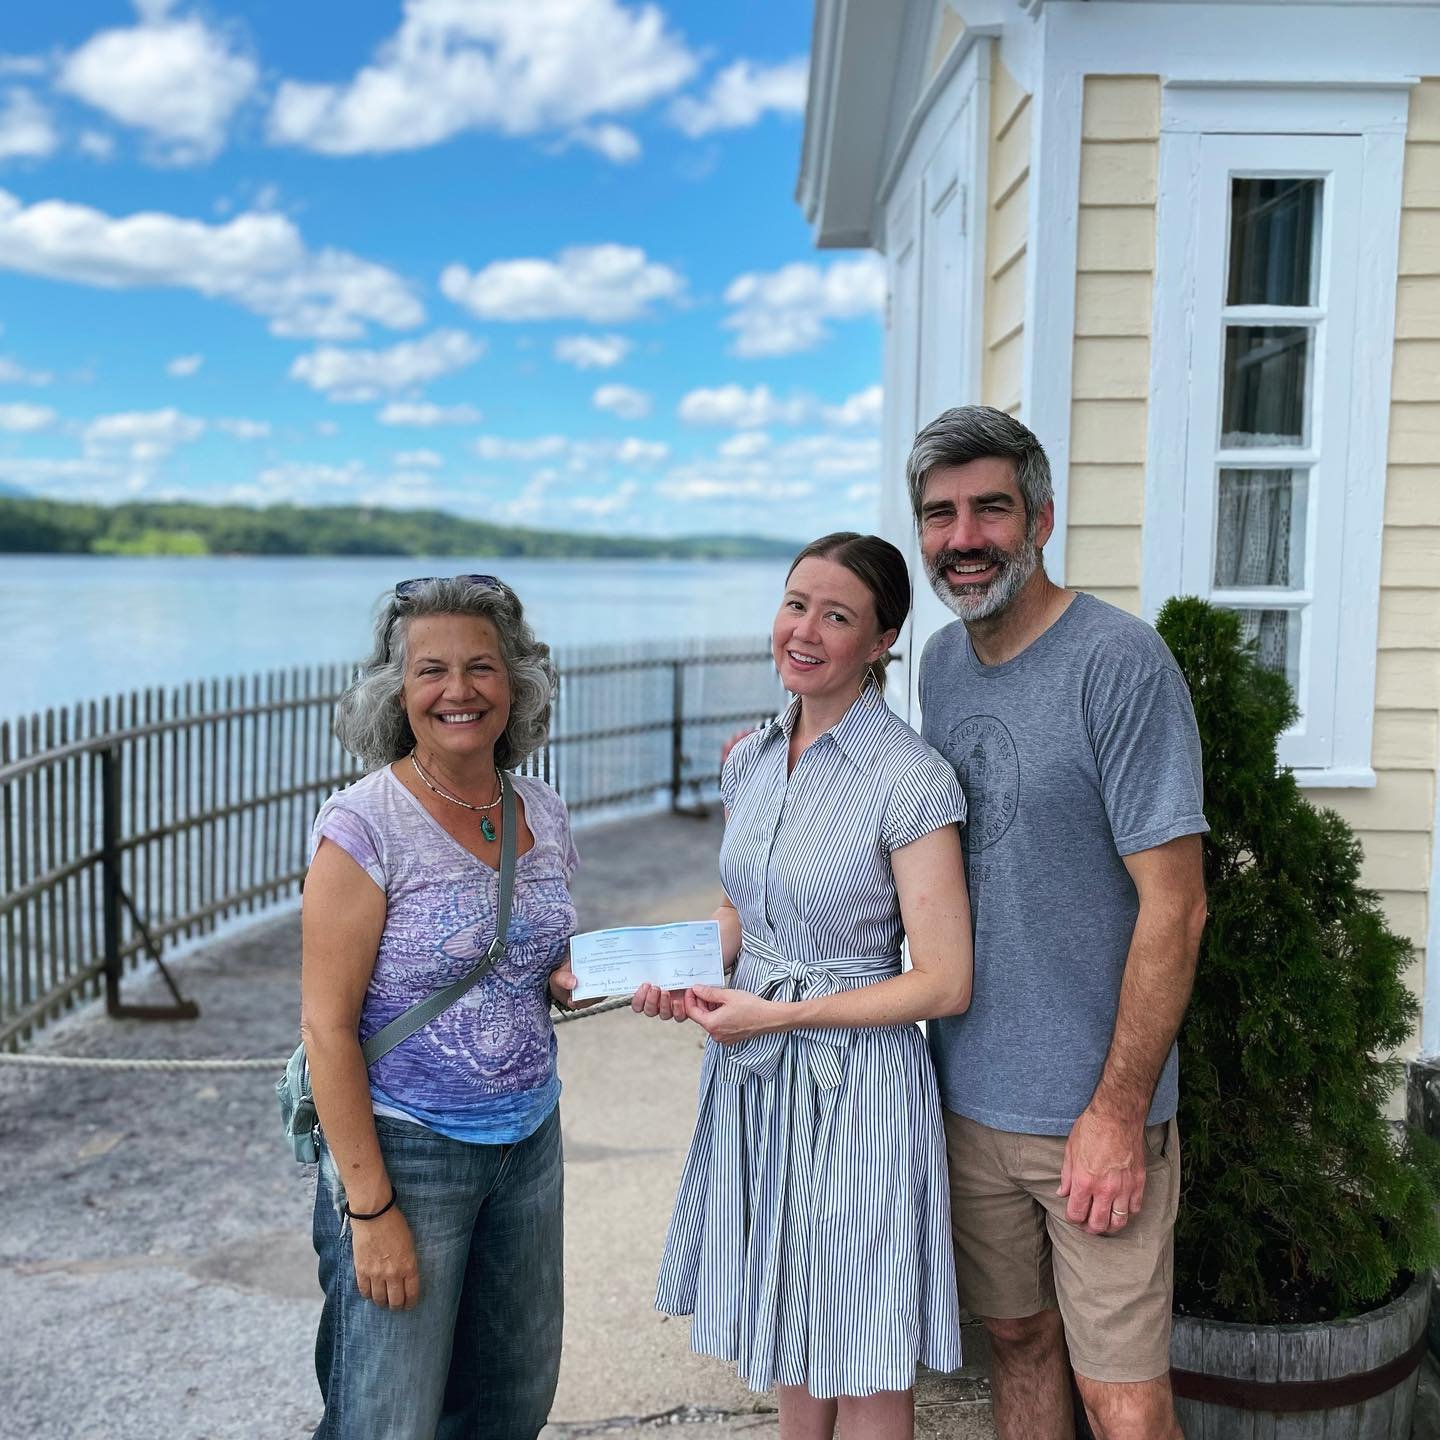 Thank you, Upstate Films, for visiting the lighthouse today! Katie Cokinos presented a generous donation from their Community Kernels program, which supports community-based organizations in our area. Support like this helps us to continue the ongoin